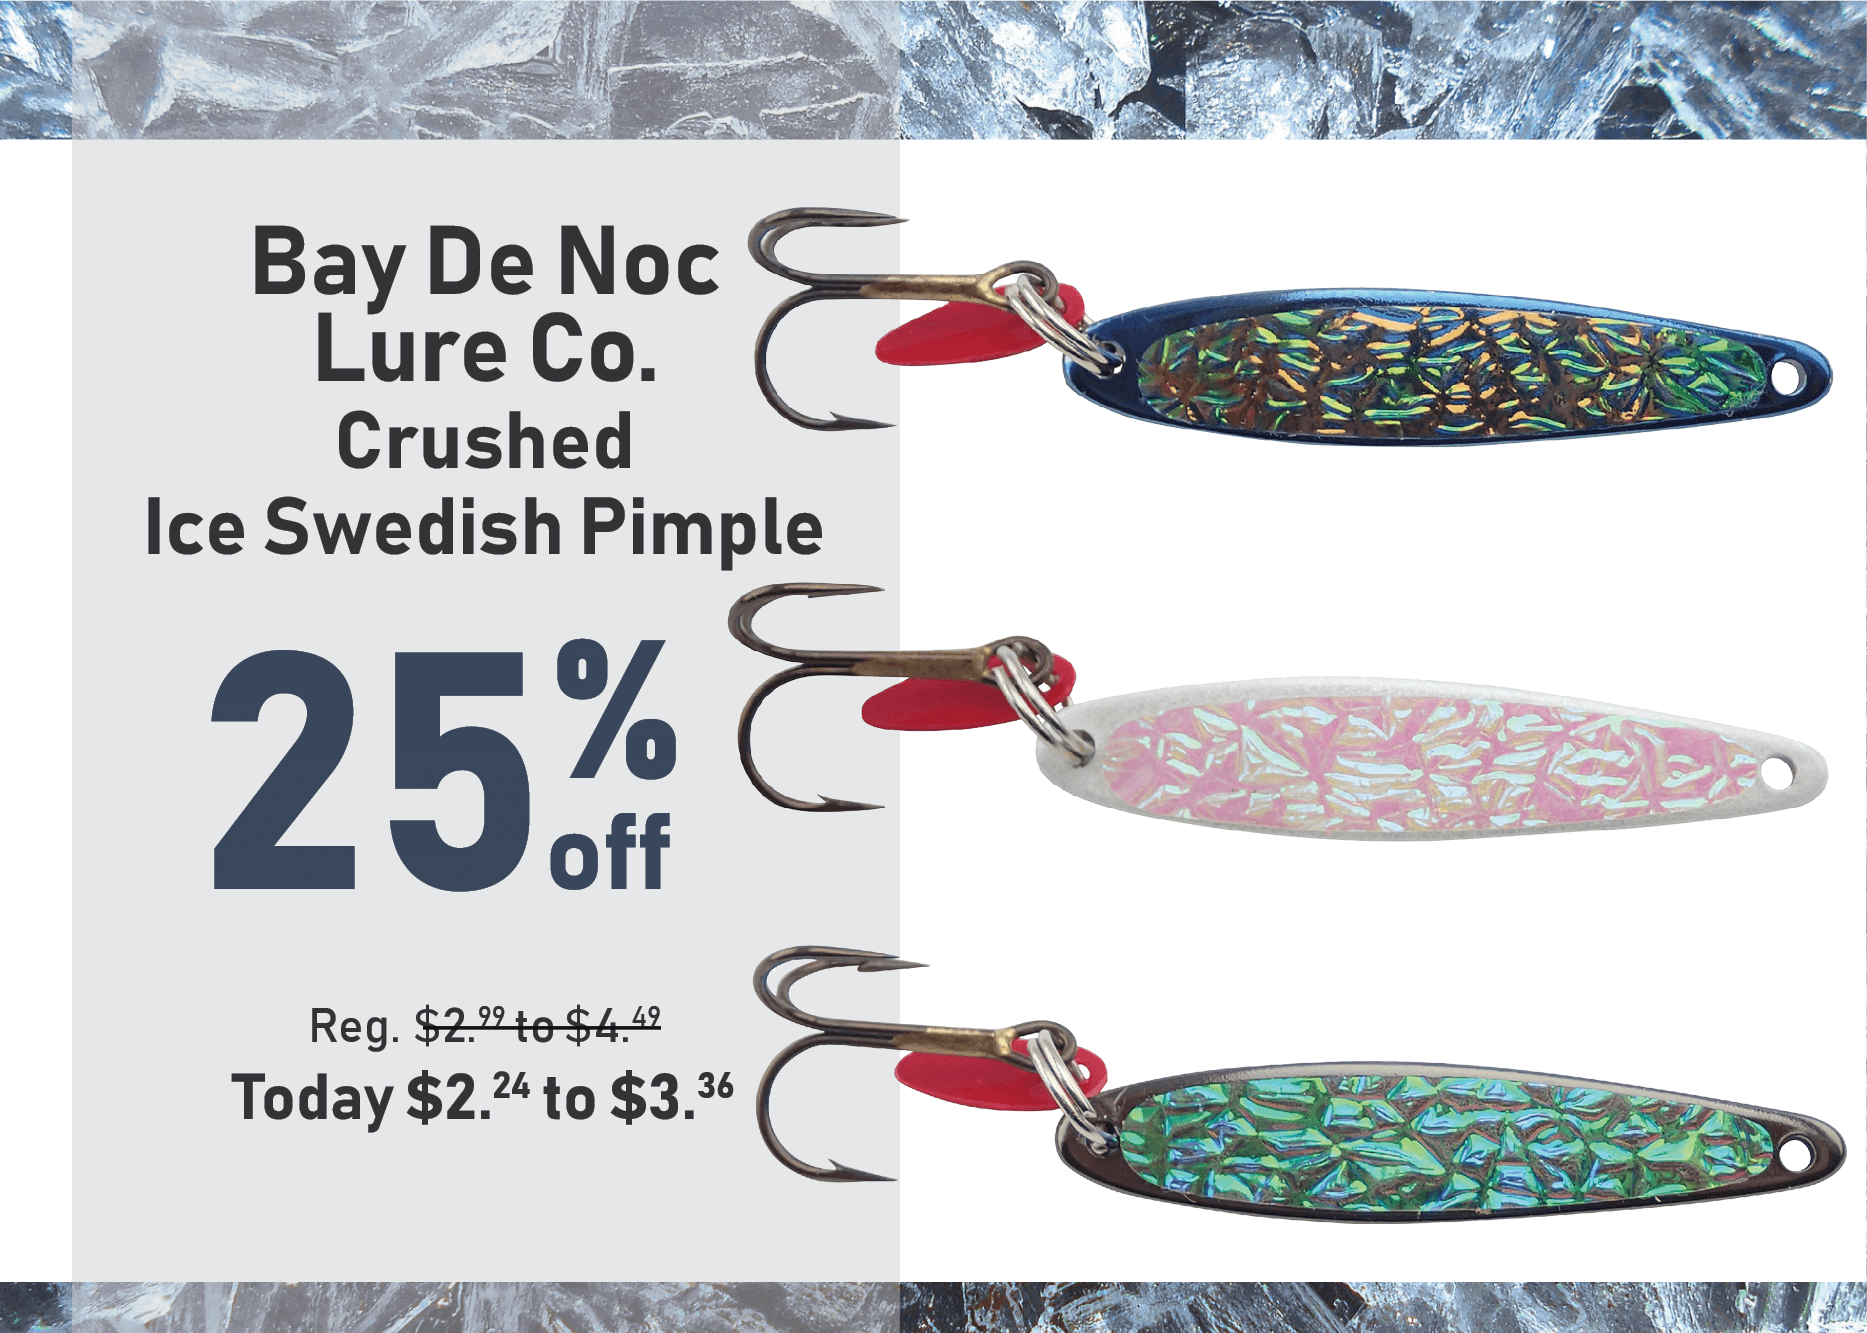 Take 25% off Bay De Noc Lure Co. Crushed Ice Swedish Pimple